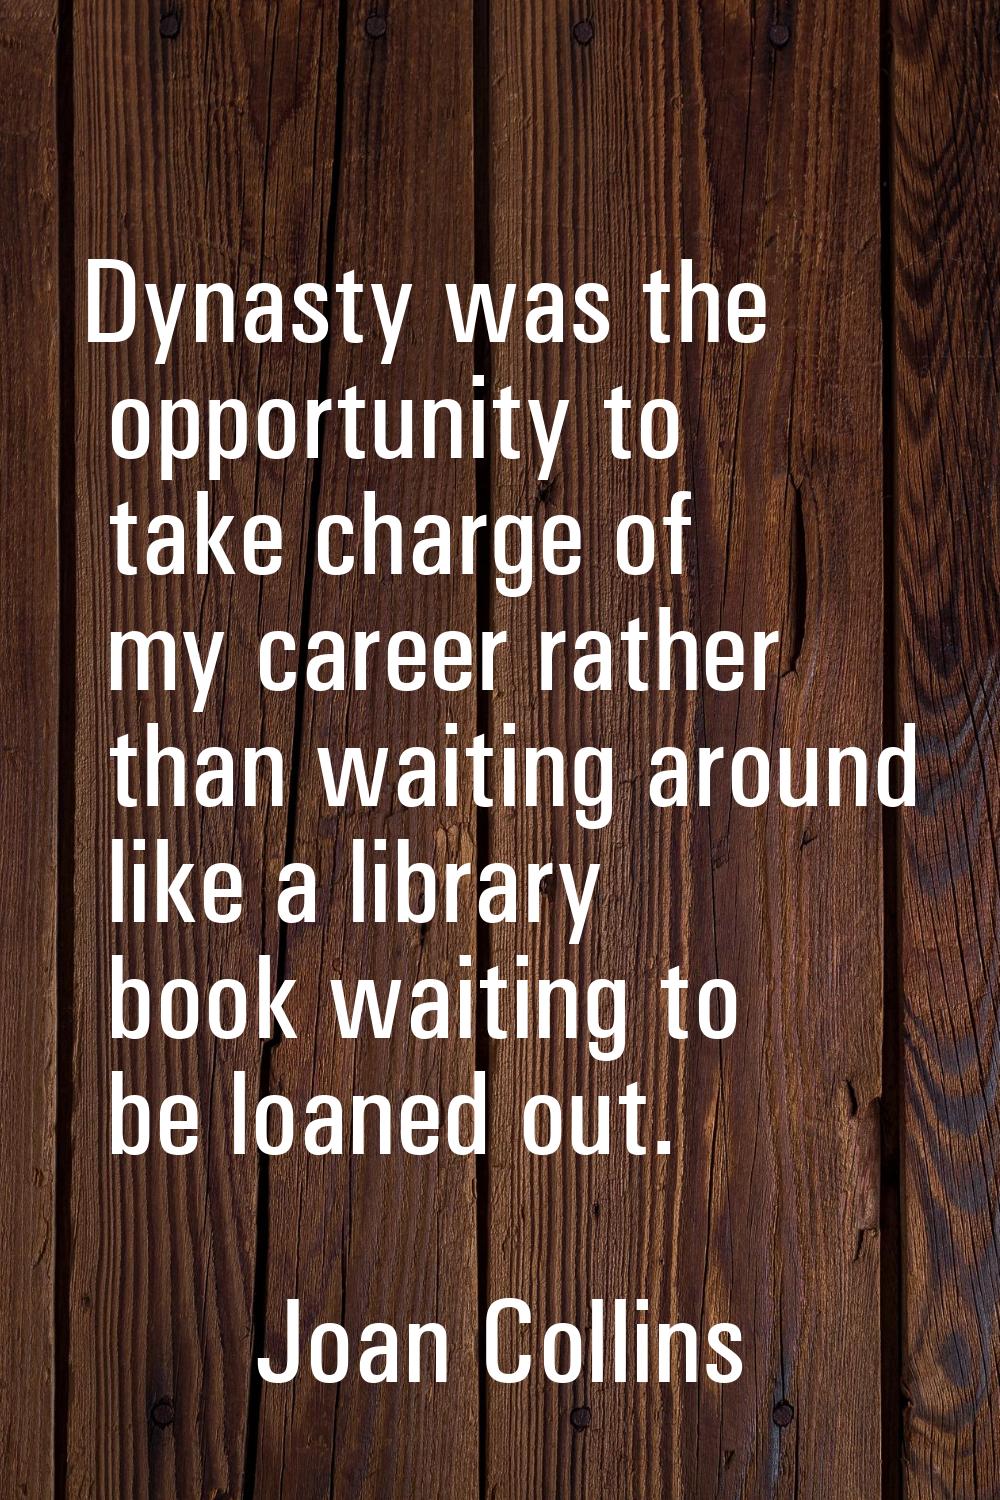 Dynasty was the opportunity to take charge of my career rather than waiting around like a library b